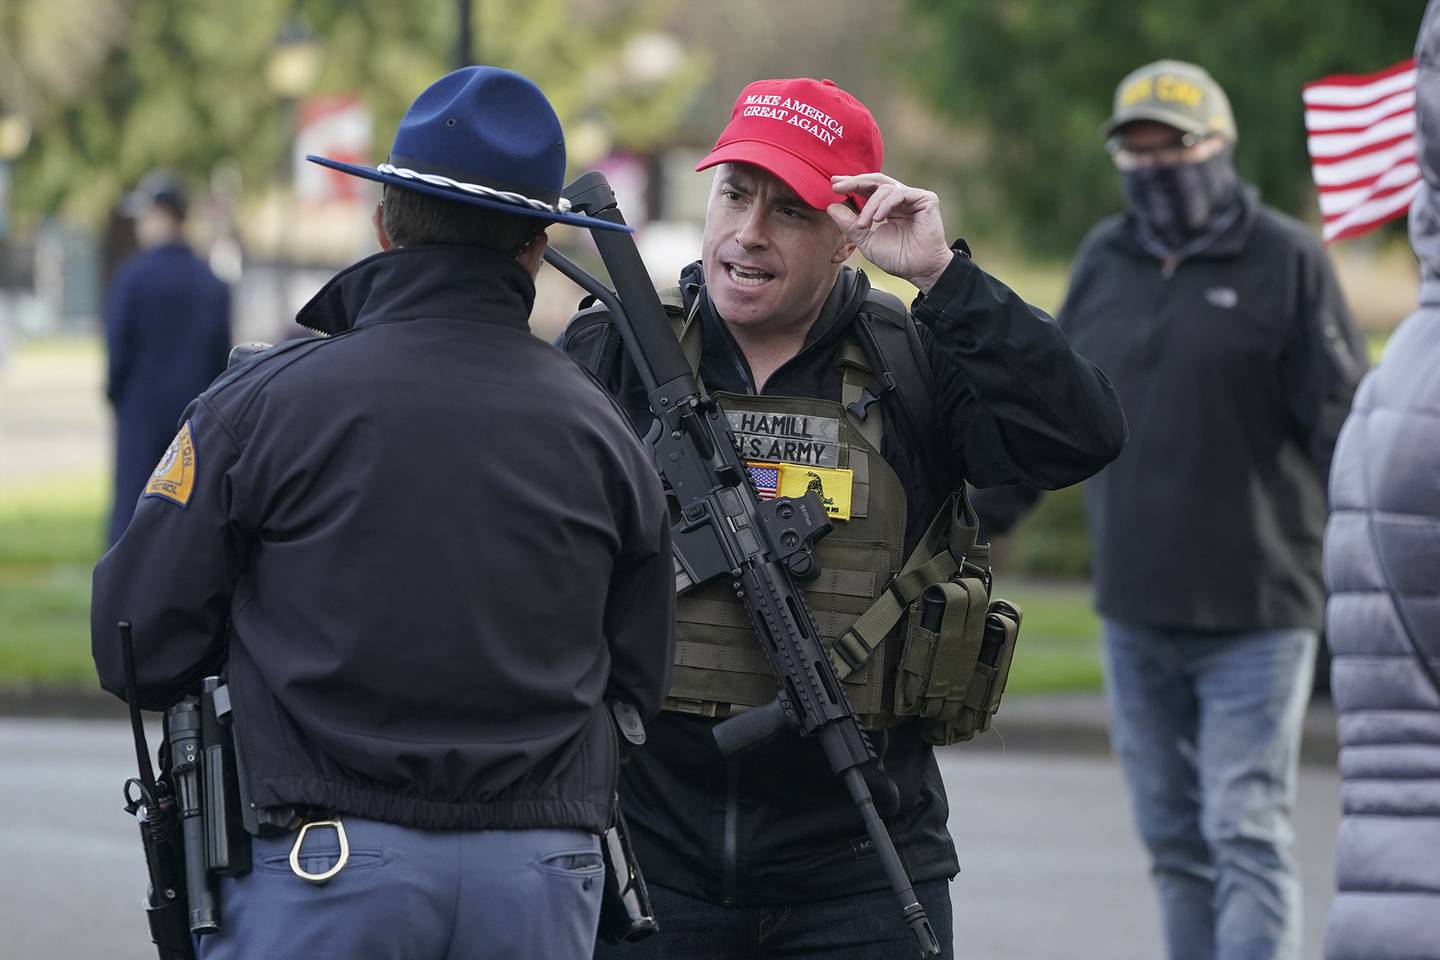 An armed supporter of President Donald Trump speaks casually with a Washington State Patrol trooper during a rally, Sunday, Jan. 10, 2021, at the Capitol in Olympia, Wash.